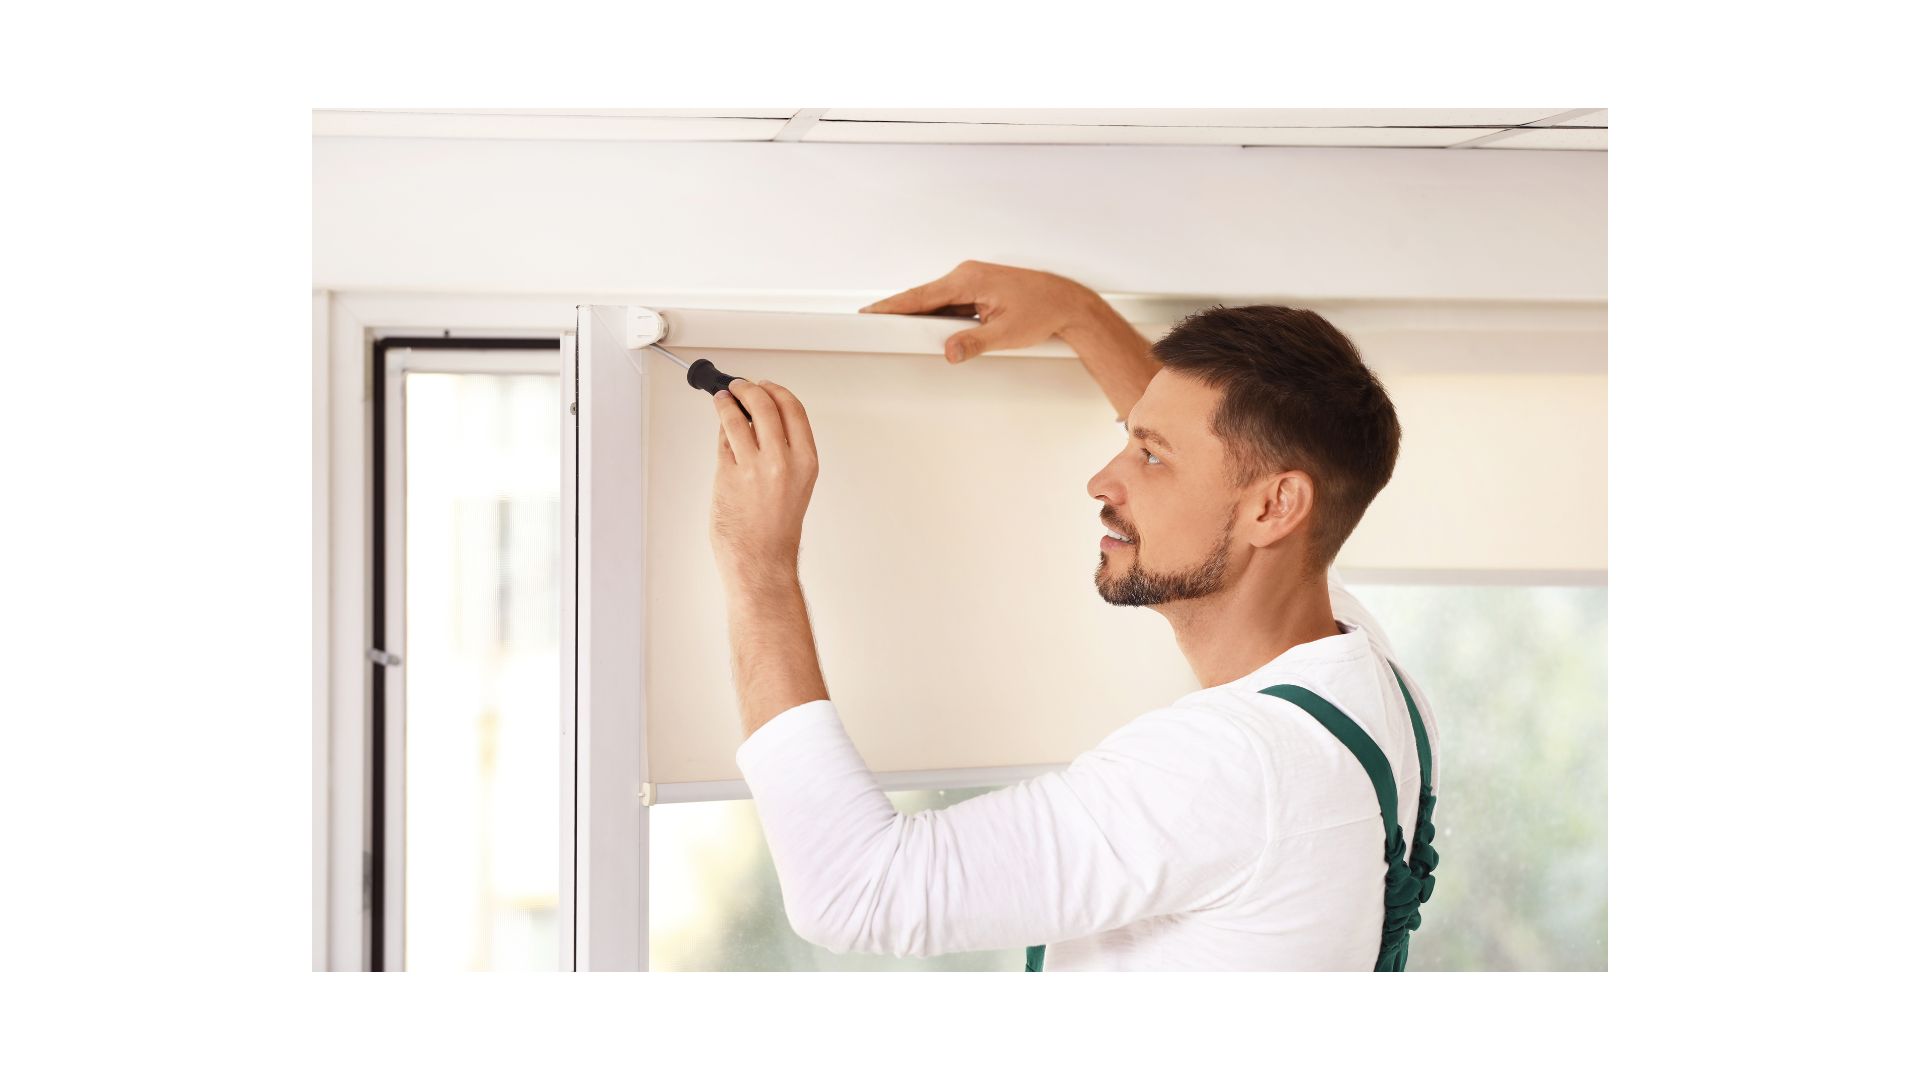 Expert Tips for Hiring a Window Company in Cleveland